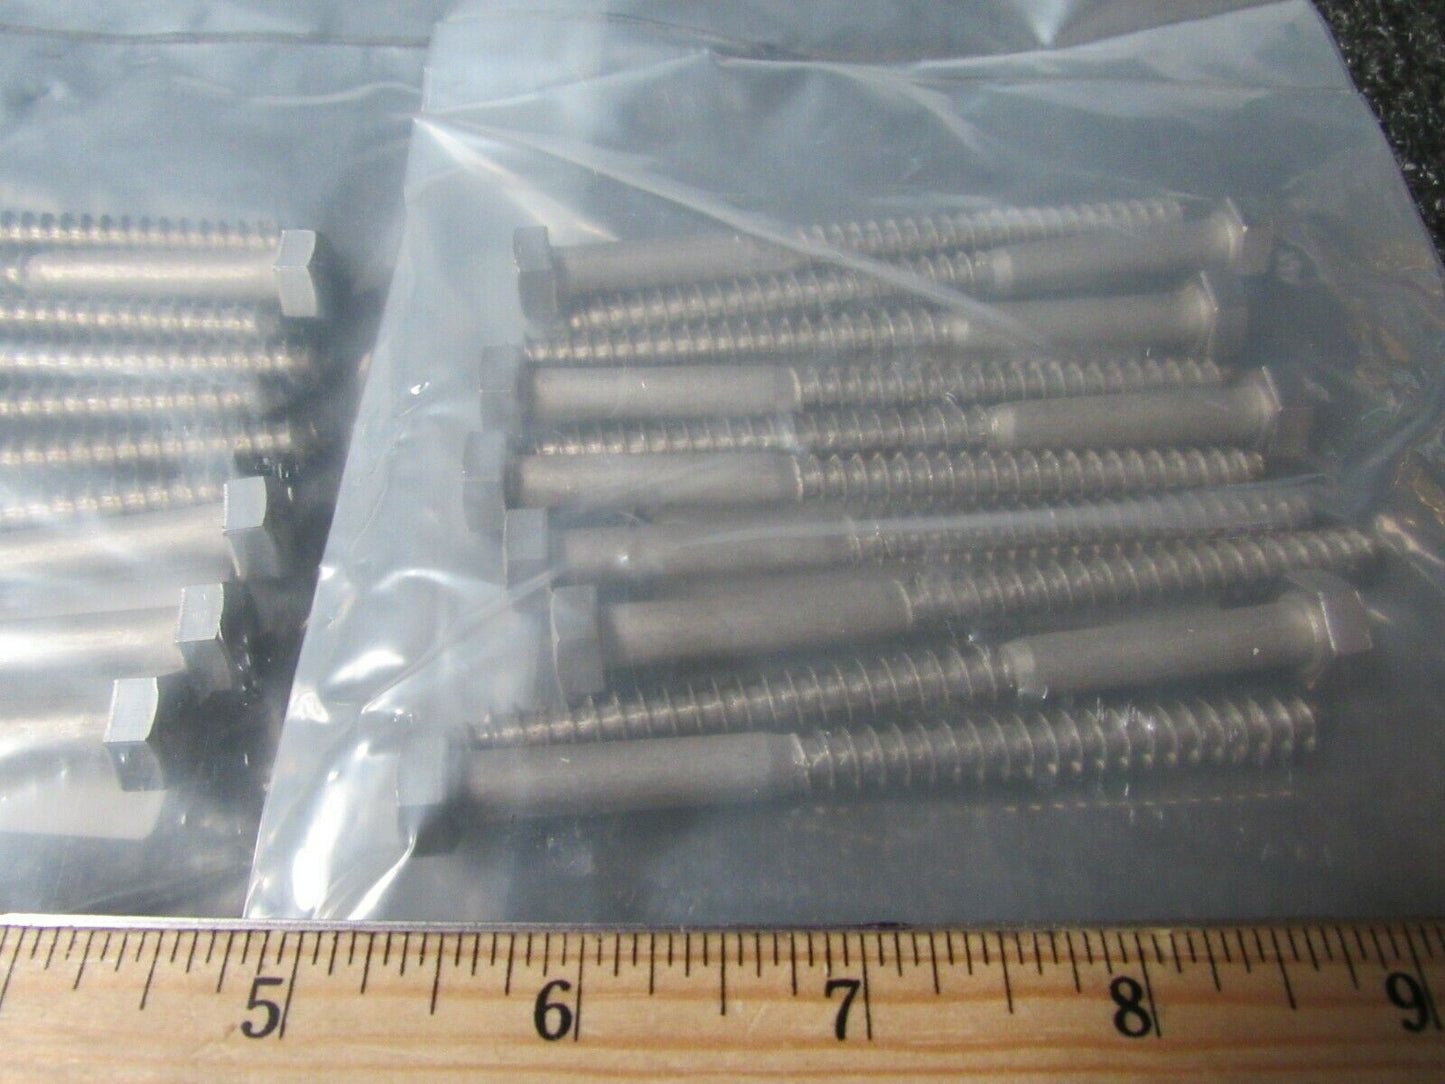 (20) FABORY Hex Lag Screw, Stainless Steel, 5/16x4 L, (2 PK of 10) (184209098536-BT32)